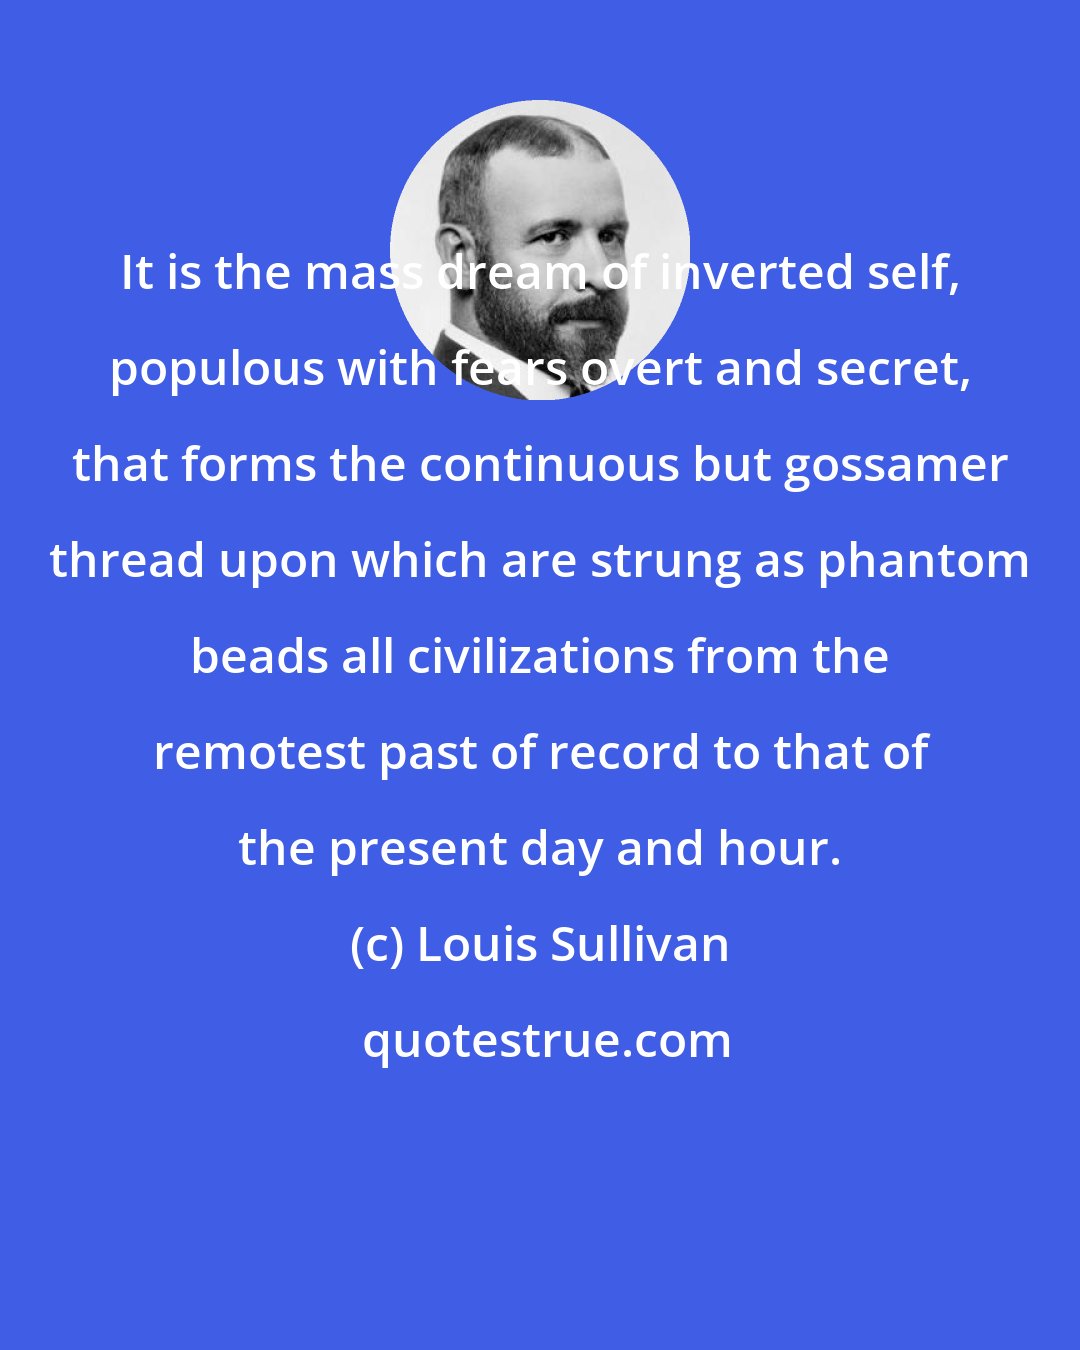 Louis Sullivan: It is the mass dream of inverted self, populous with fears overt and secret, that forms the continuous but gossamer thread upon which are strung as phantom beads all civilizations from the remotest past of record to that of the present day and hour.